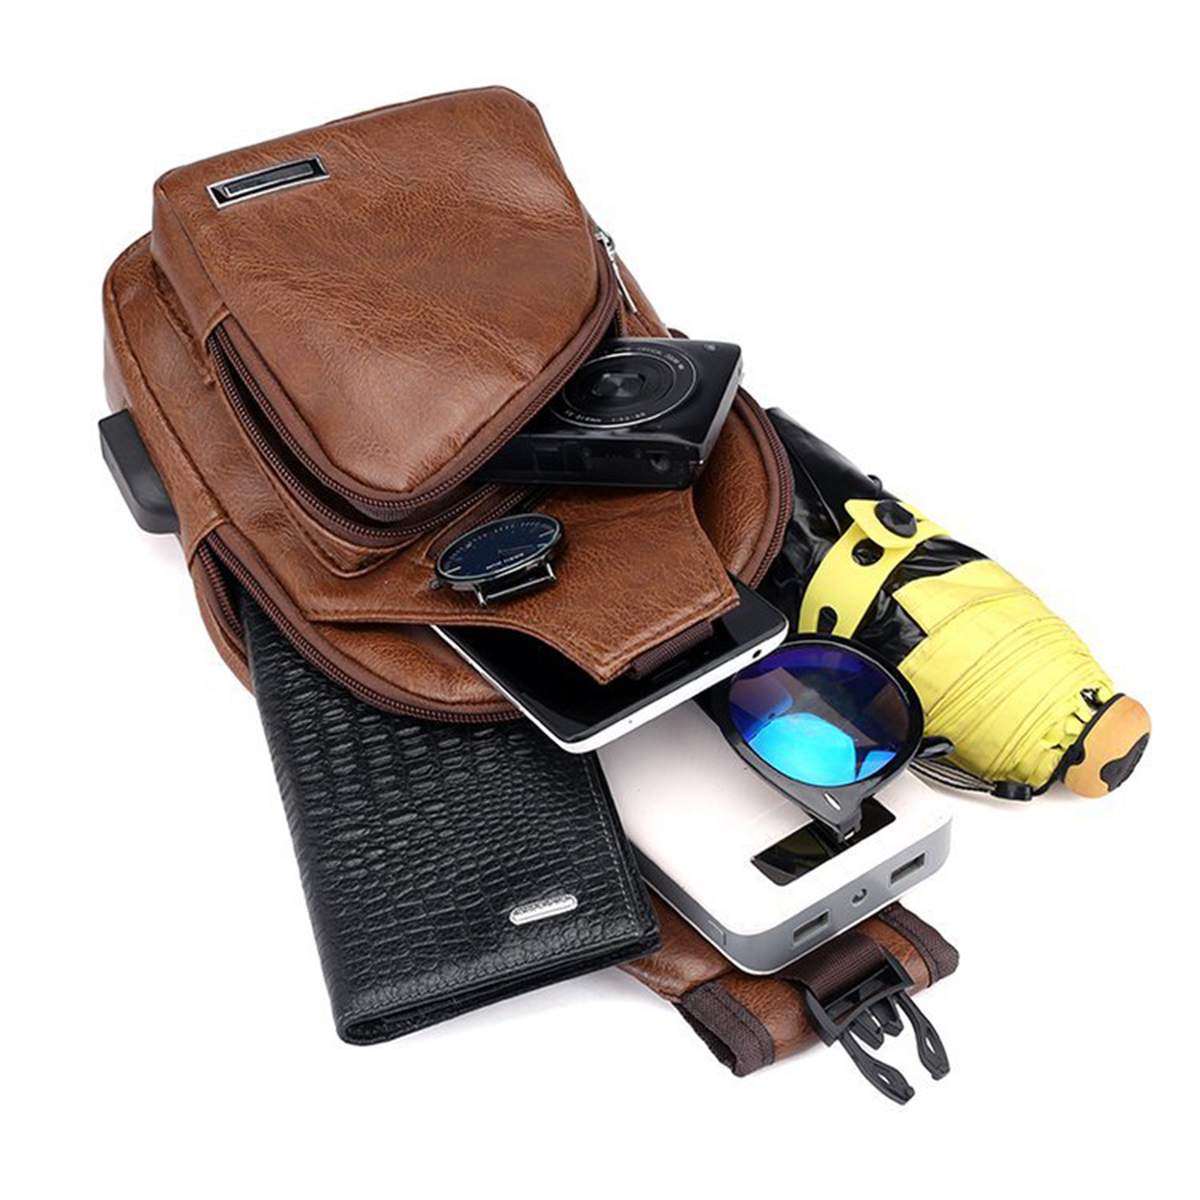 Casual-Outdoor-Travel-USB-Charging-Port-Sling-Bag-Leather-Chest-Bag-Crossbody-Bag-1637756-3